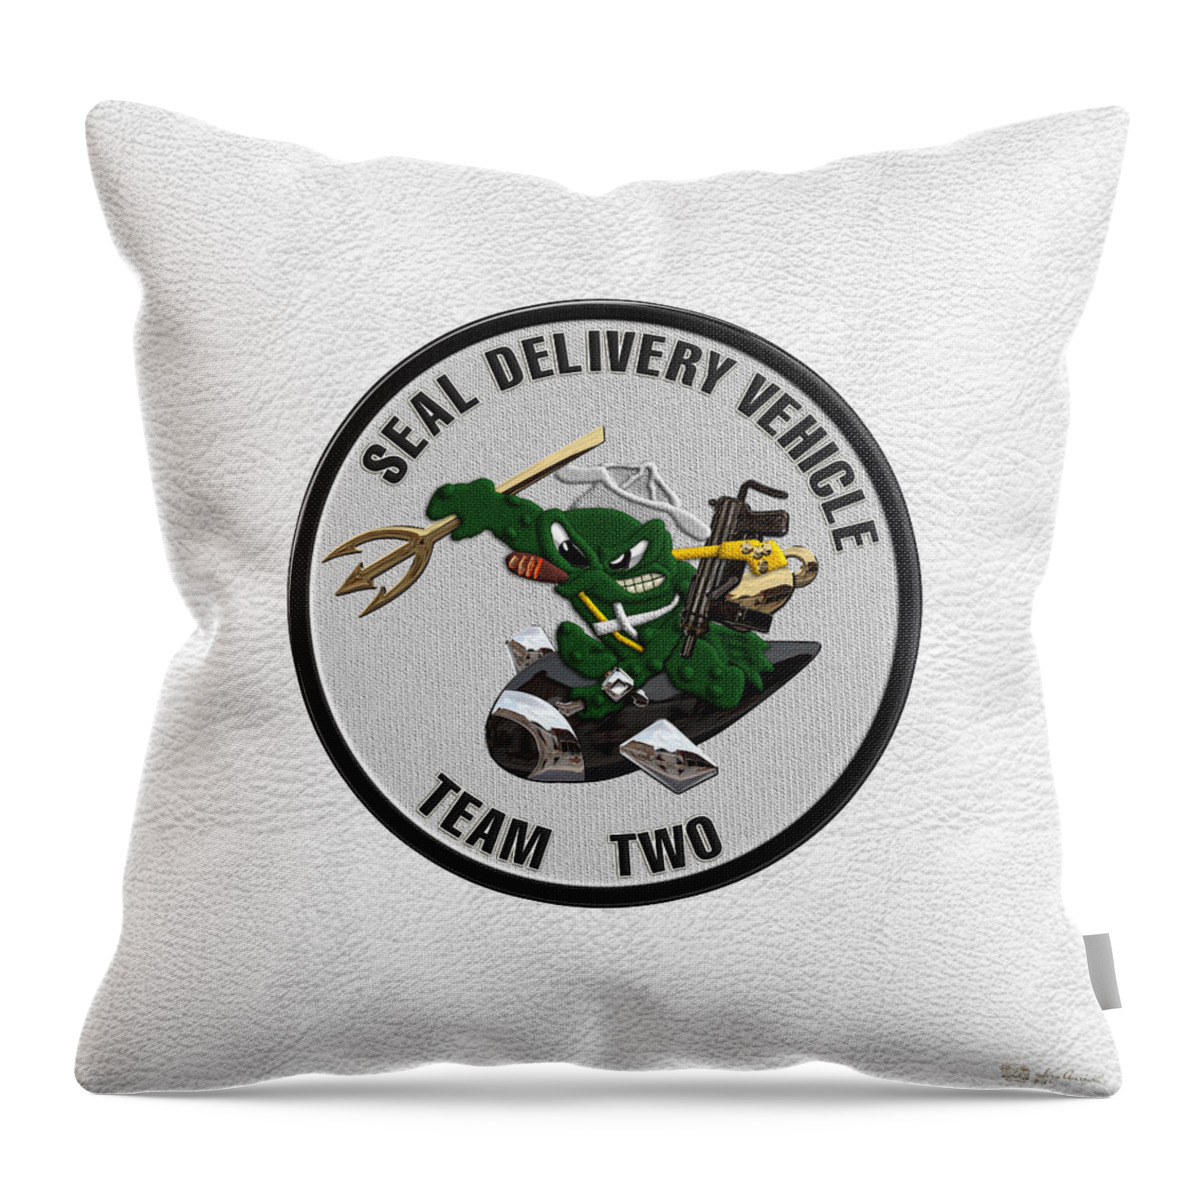 'military Insignia & Heraldry - Nswc' Collection By Serge Averbukh Throw Pillow featuring the digital art S E A L Delivery Vehicle Team Two - S D V T 2 Patch over White Leather by Serge Averbukh